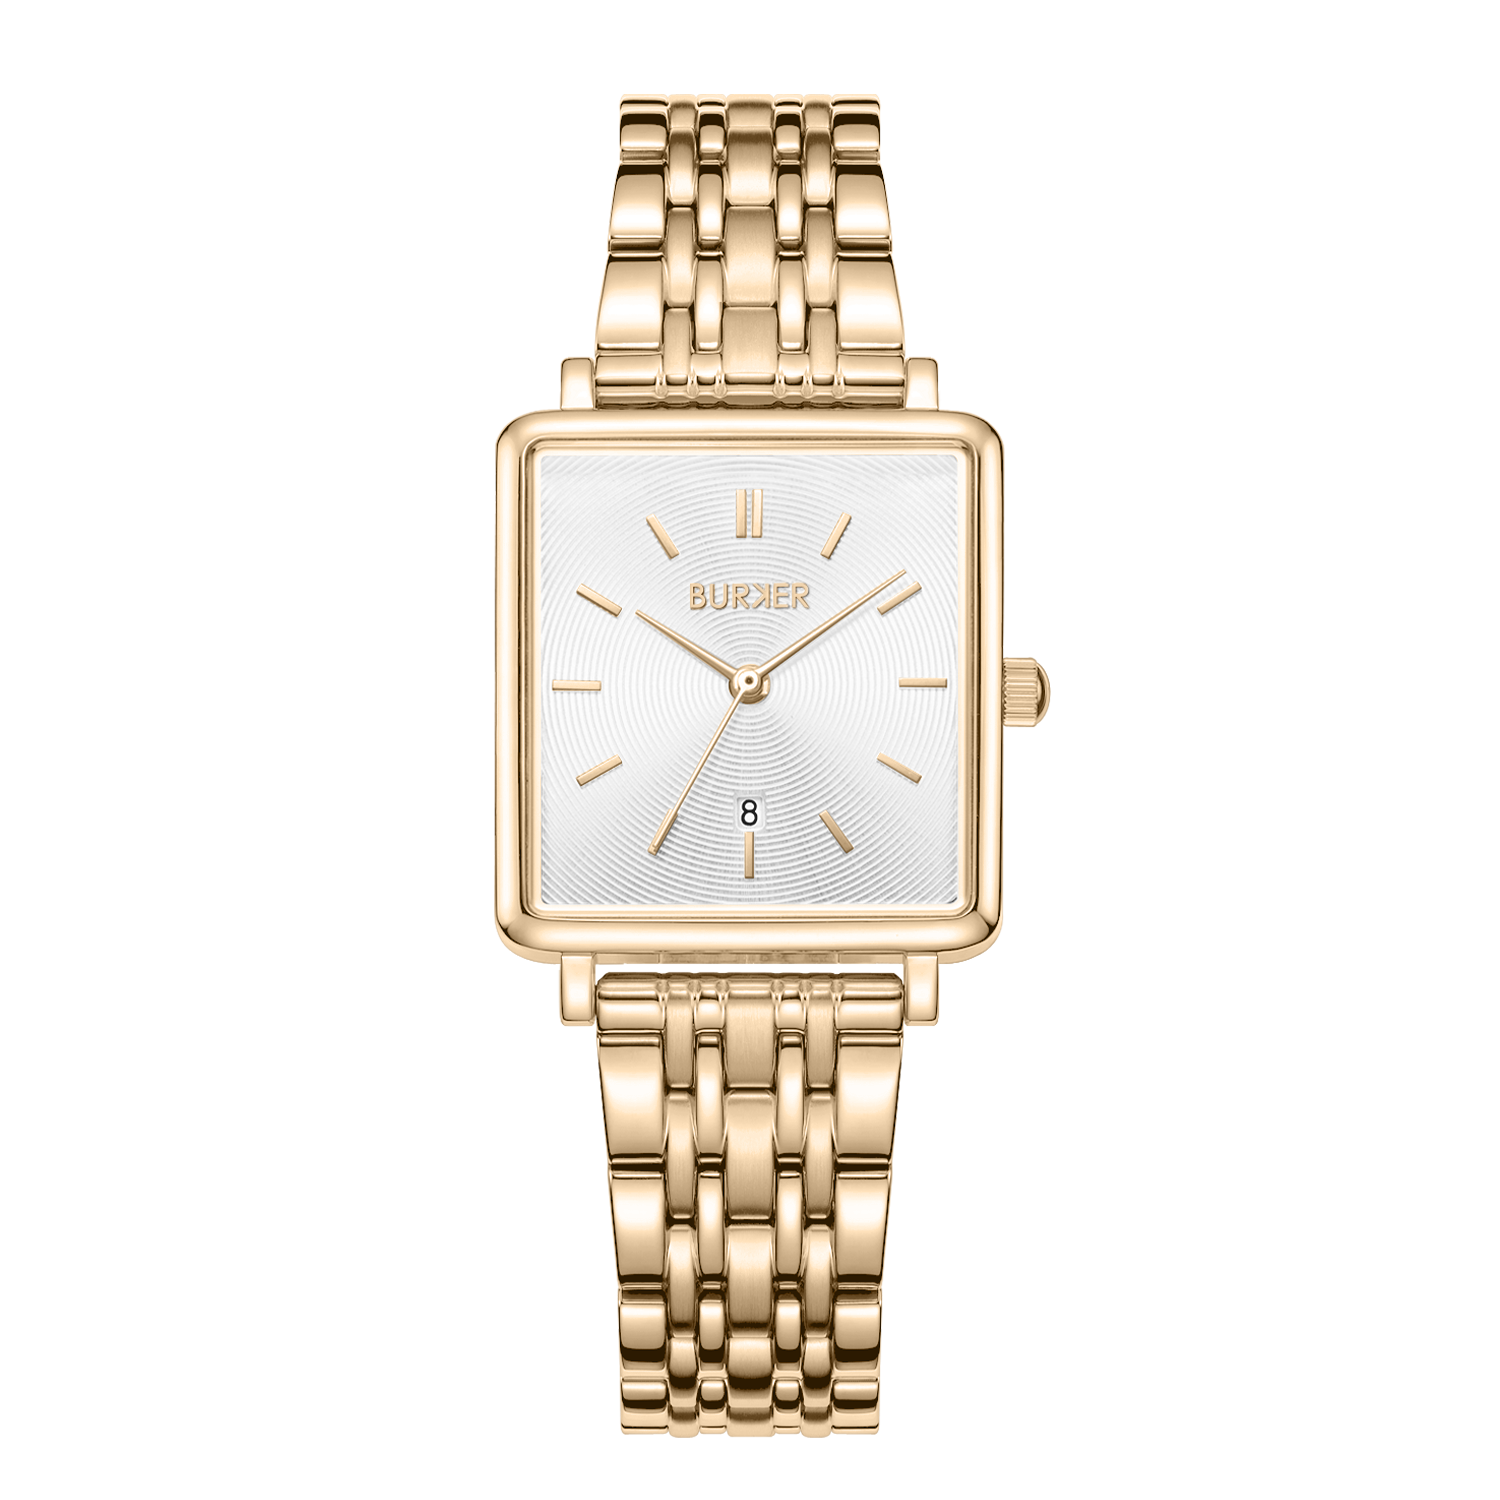 Daisy Gold – Burker Watches